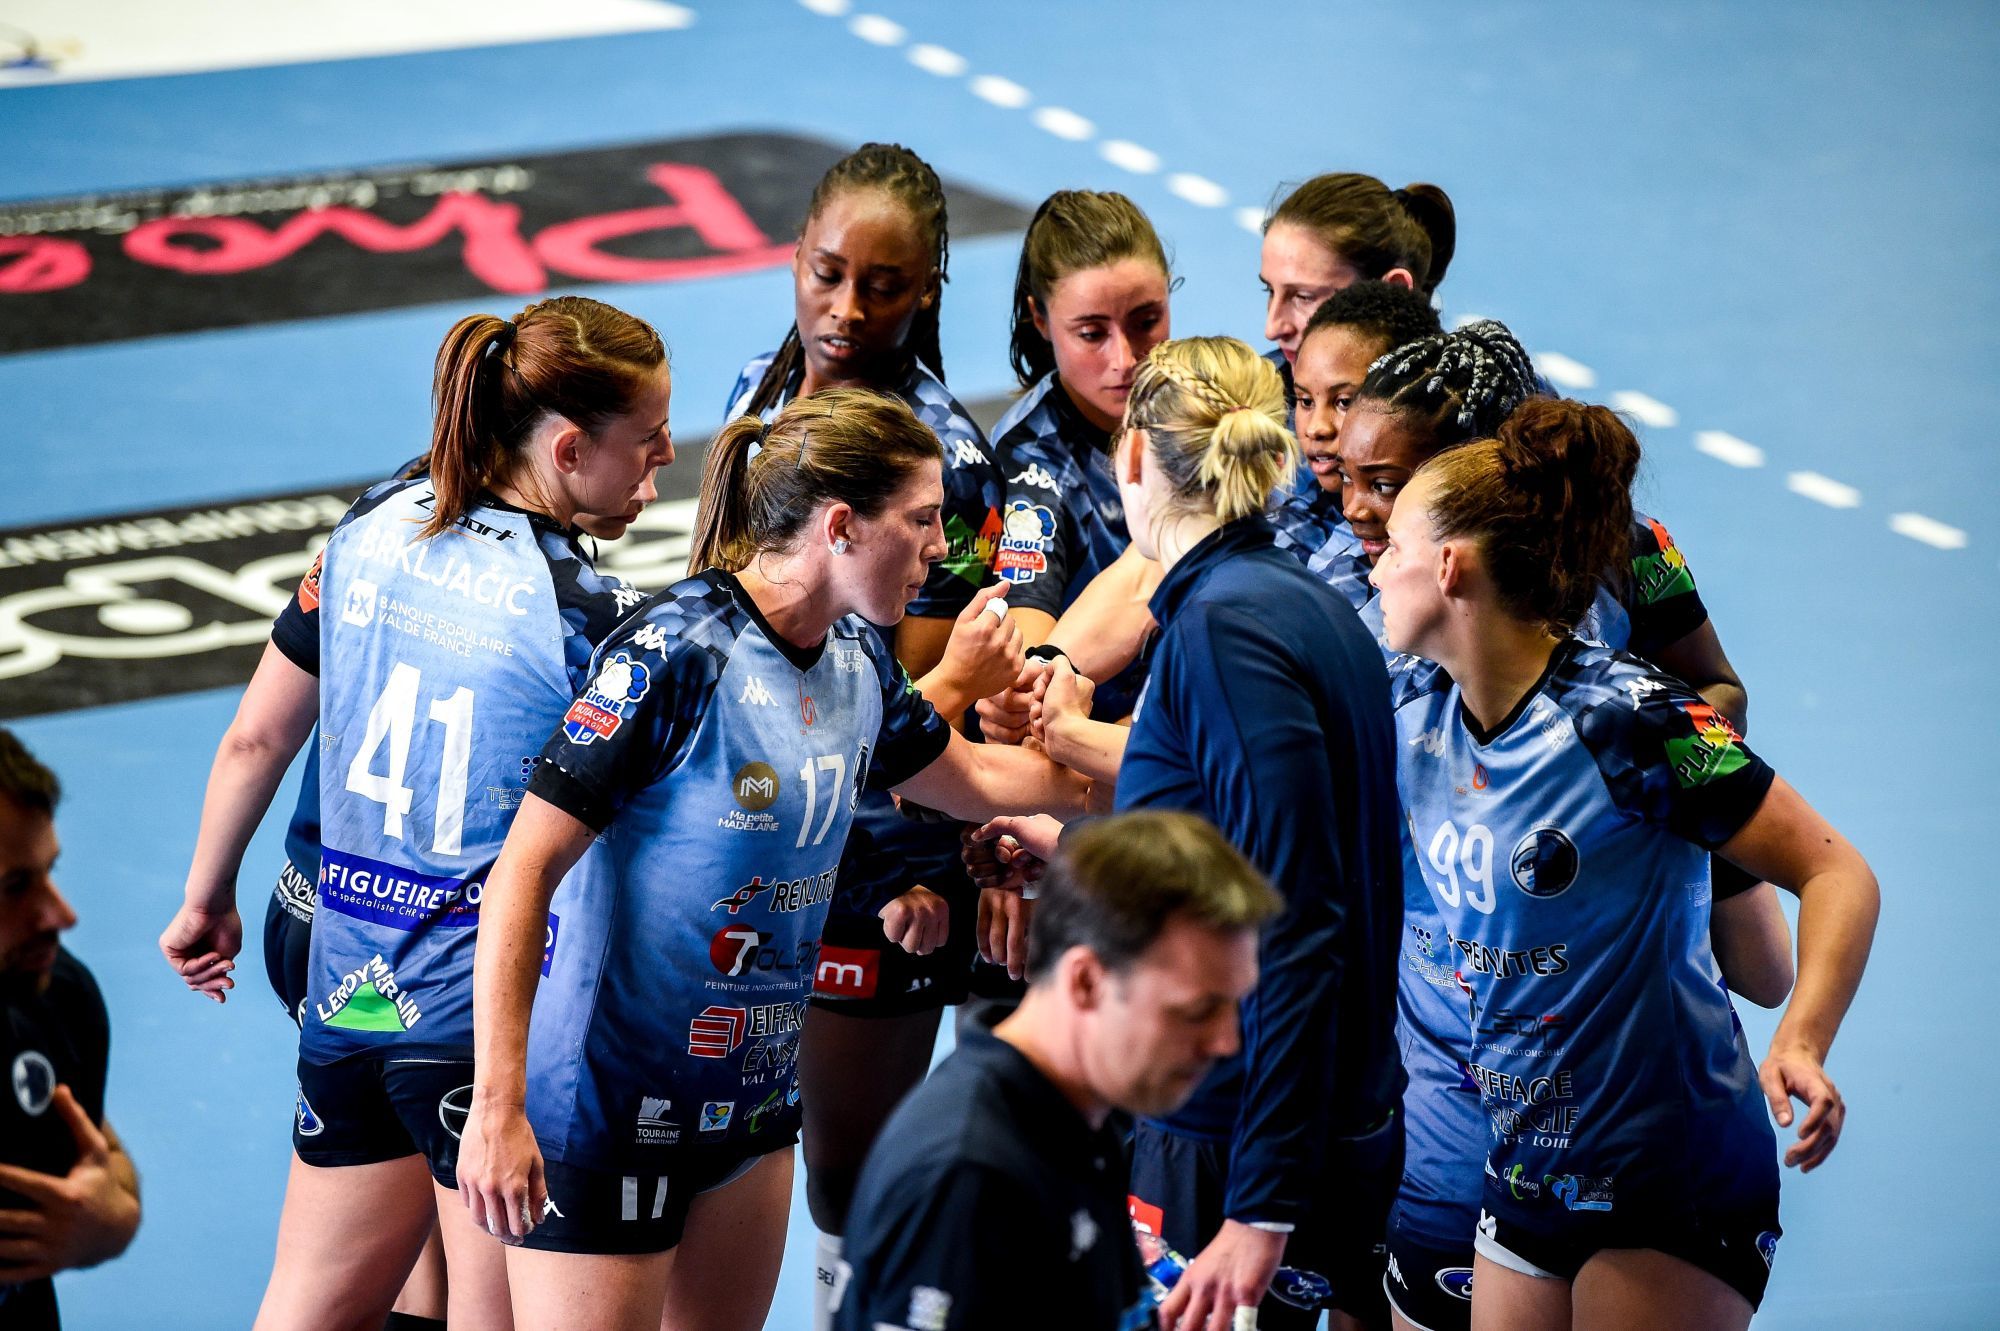 Team of CTHB during the Ligue Butagaz Energie match between Chambray and Paris 92 on May 8, 2021 in Chambray-les-Tours, France. (Photo by Hugo Pfeiffer/Icon Sport) - --- - Gymnase de la Fontaine Blanche - Chambray-les-Tours (France)